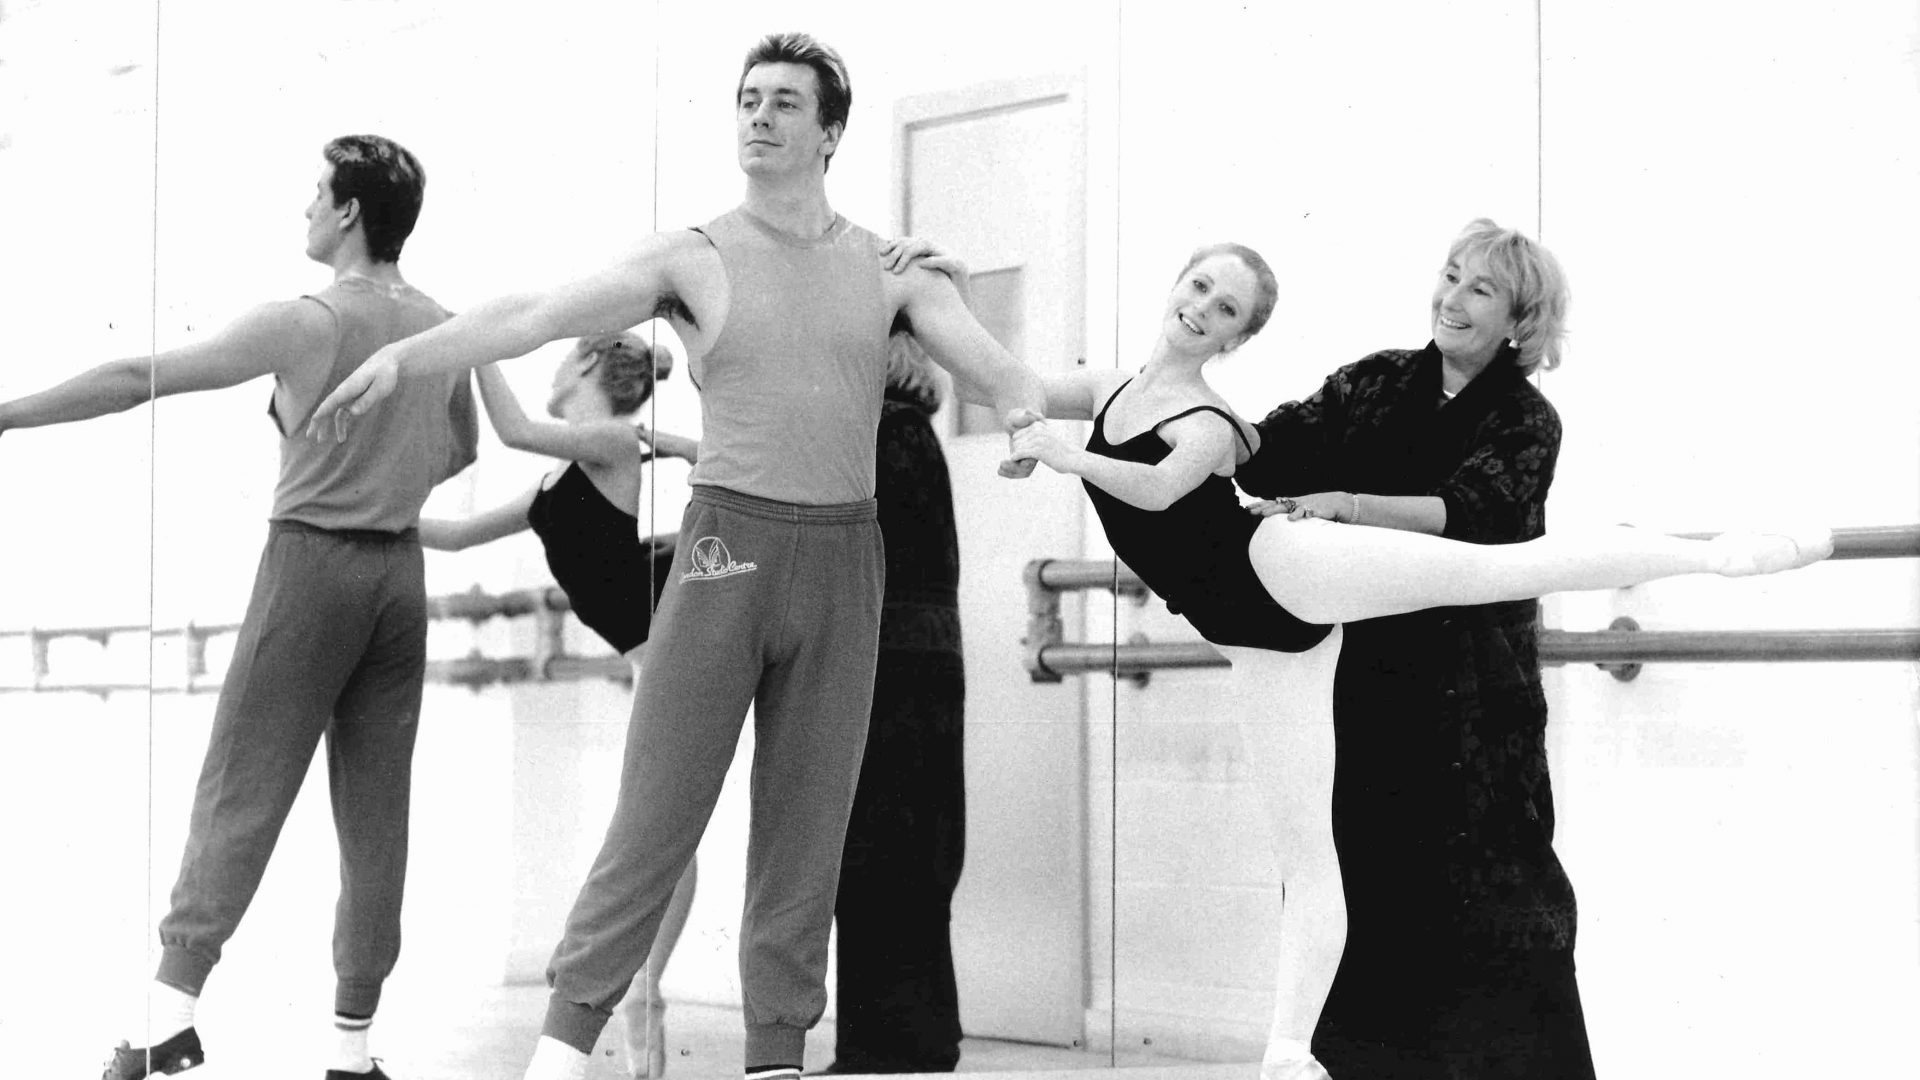 Bridget Espinosa teaching ballet to students Paul Jarvis and Nicola Rodmell